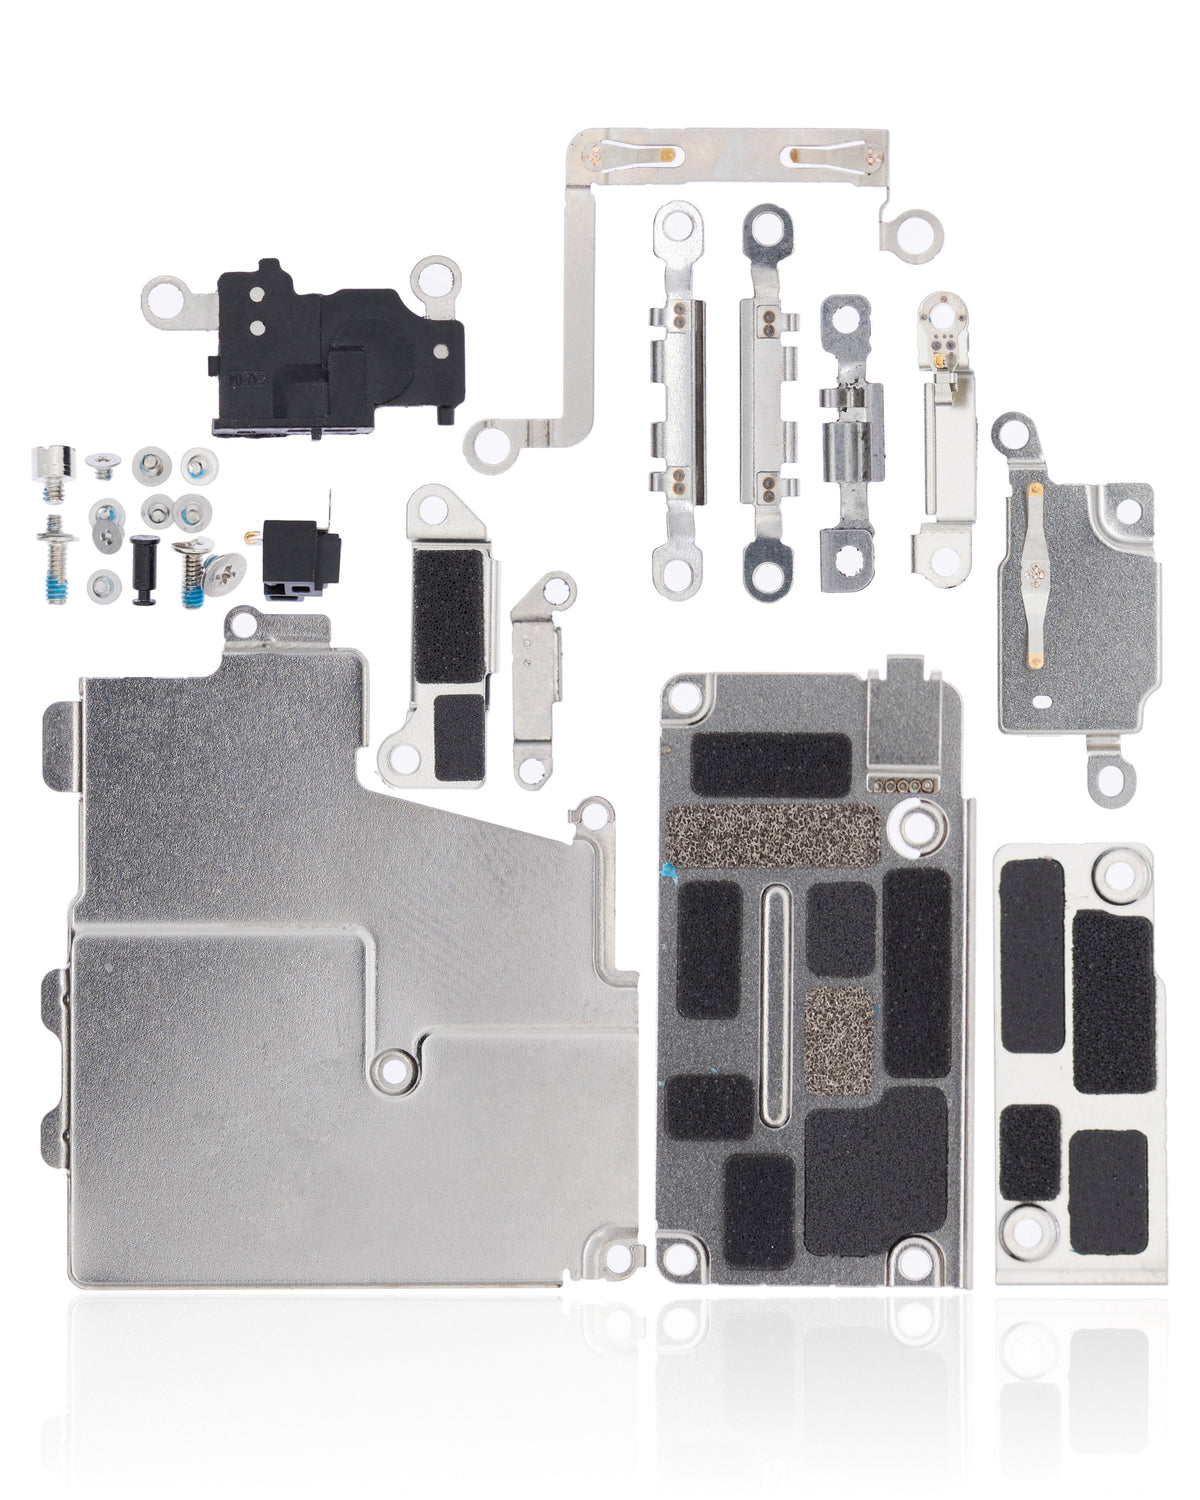 FULL SET SMALL METAL BRACKET FOR IPHONE 12 PRO